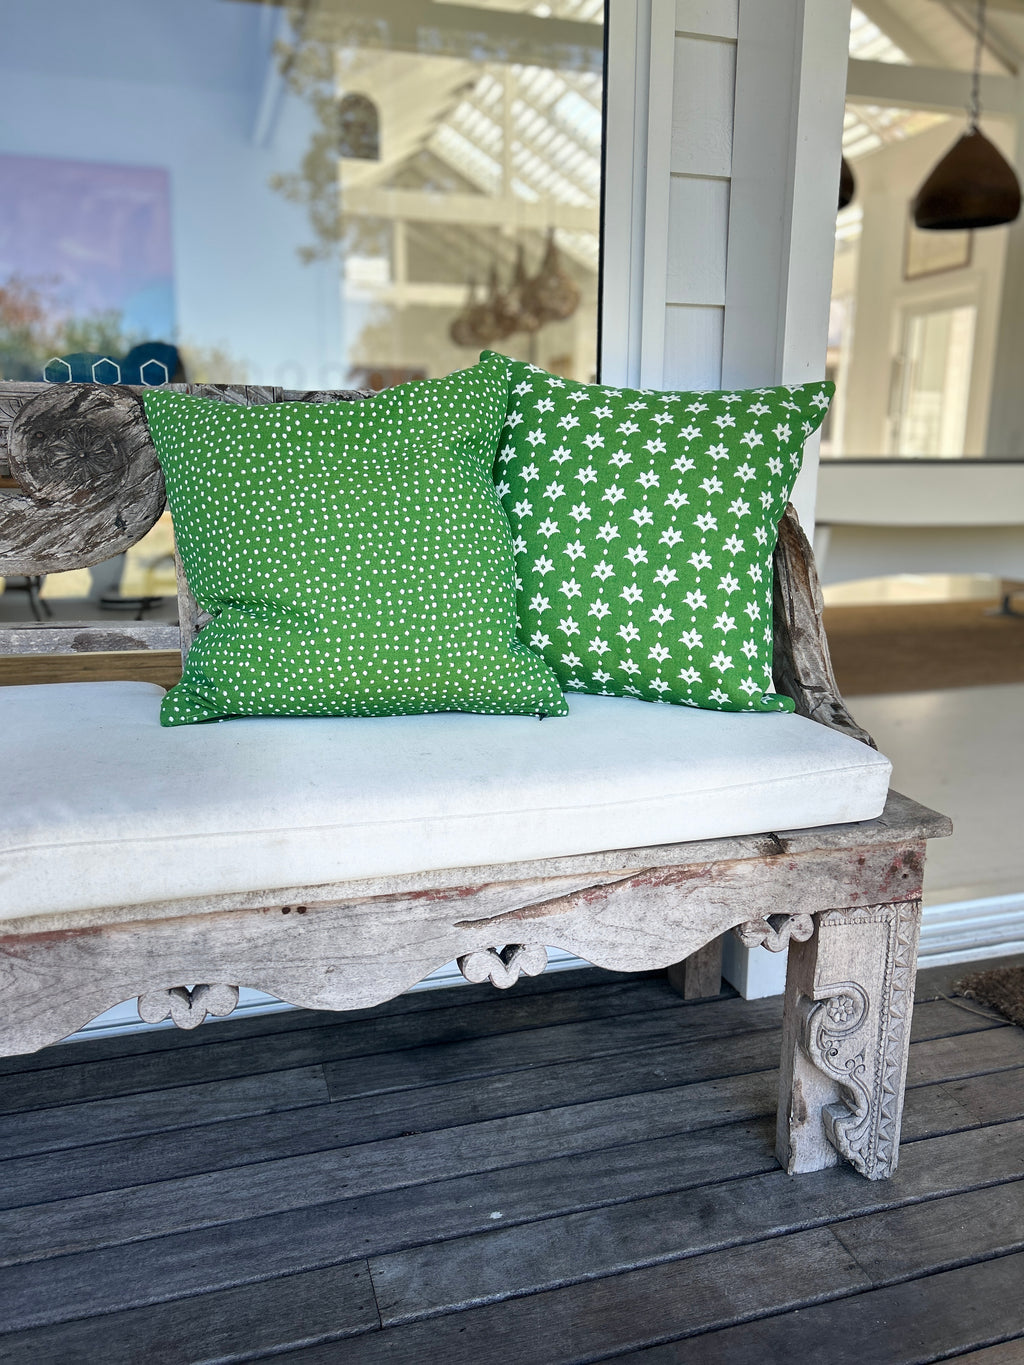 Avalon - Grass Green and White Outdoor Fabric - The Long Weekend Fabric House